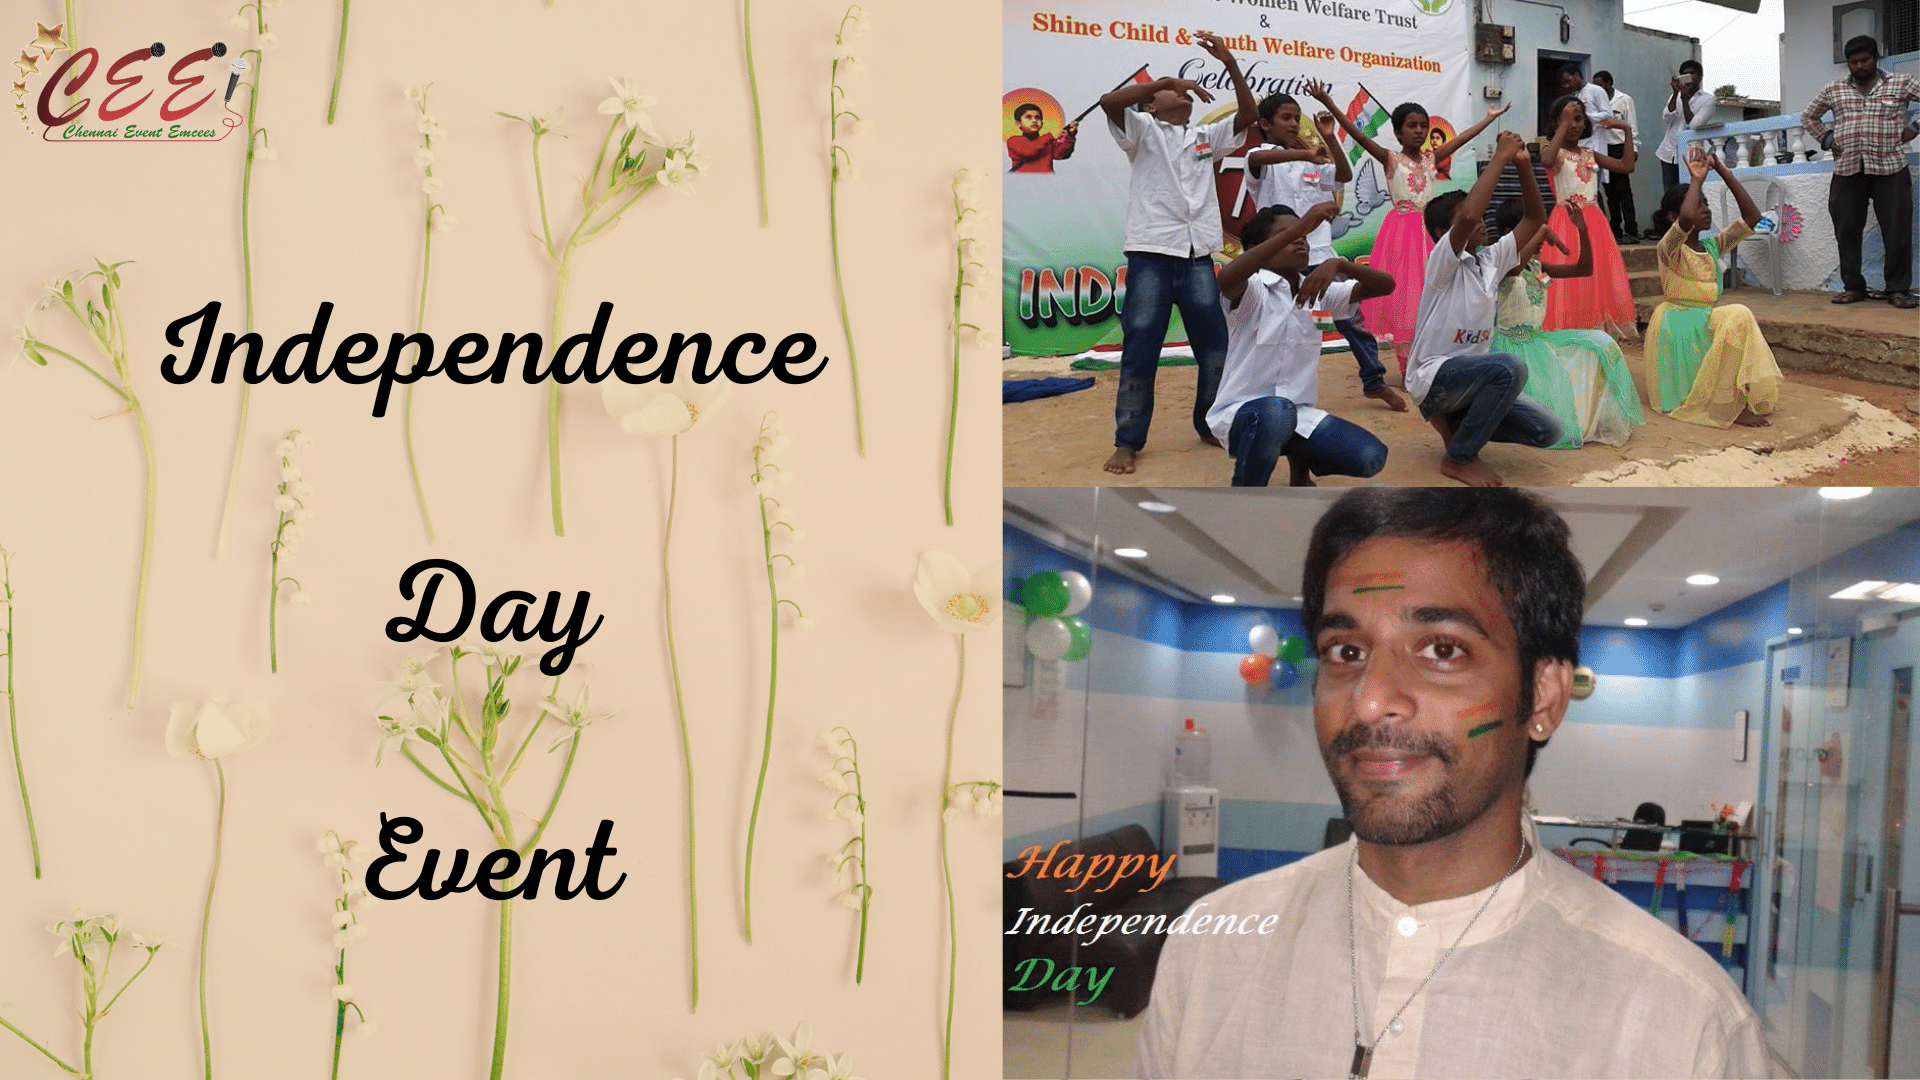 Event Plan for Independence Day Events by Chennai Male Emcee Thamizharasan Karunakaran